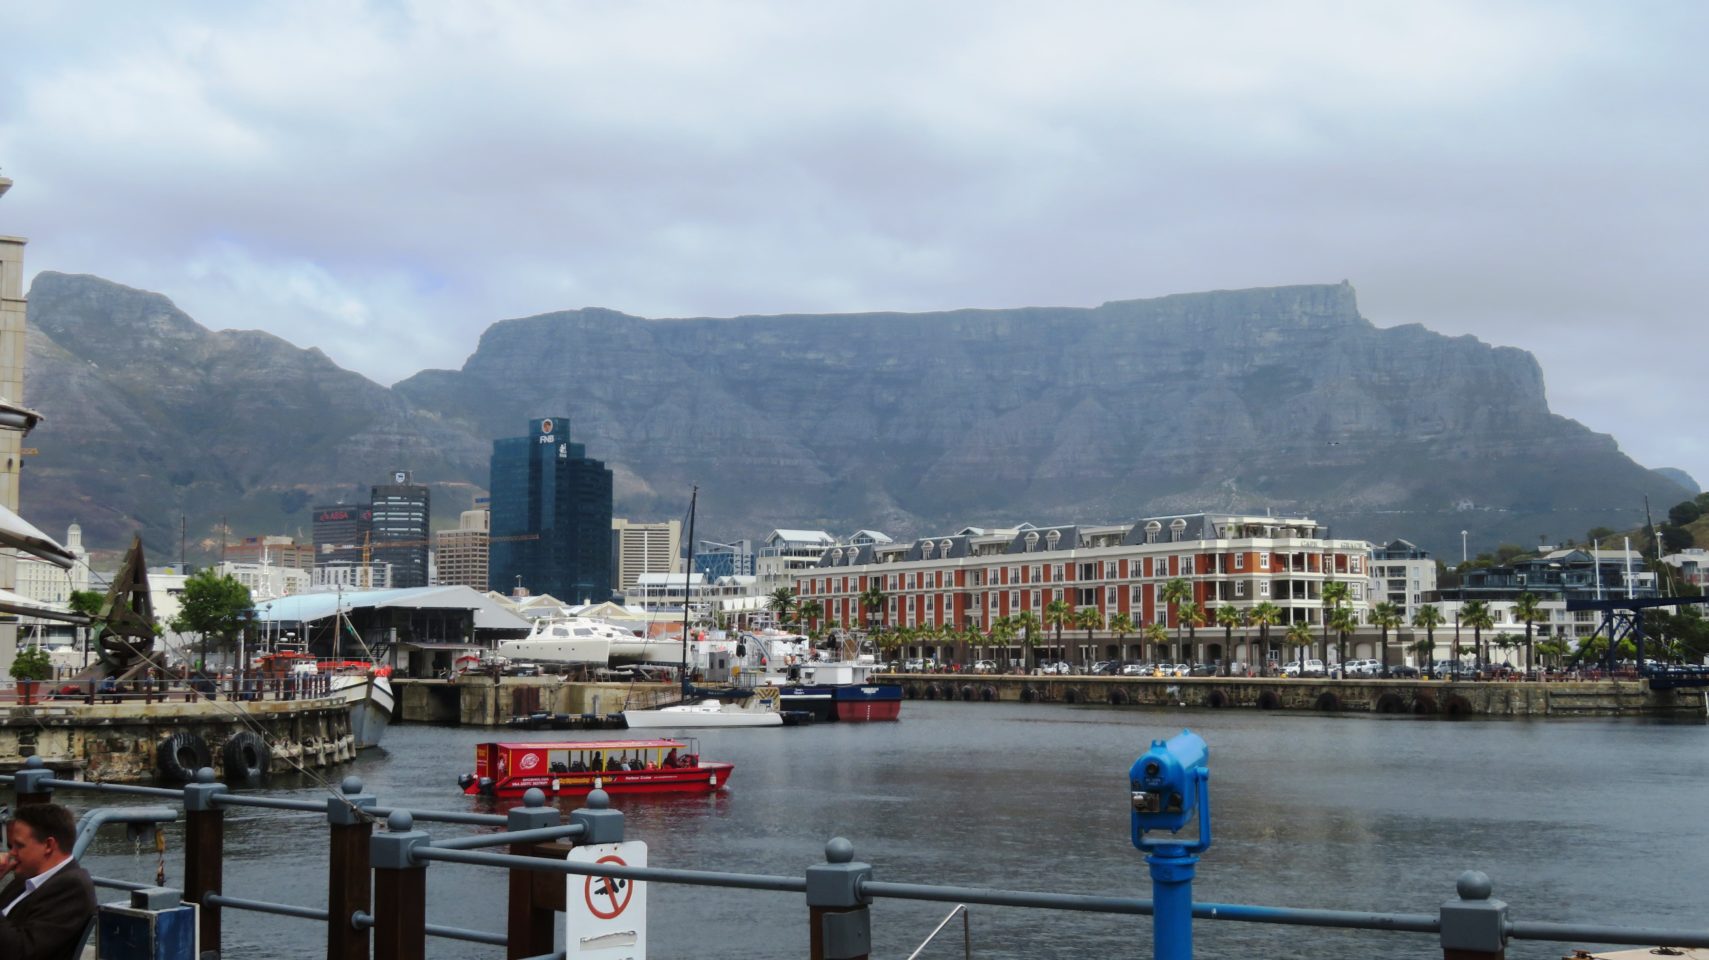 Cape Grace Hotel on the V&A Waterfront in Cape Town, South Africa